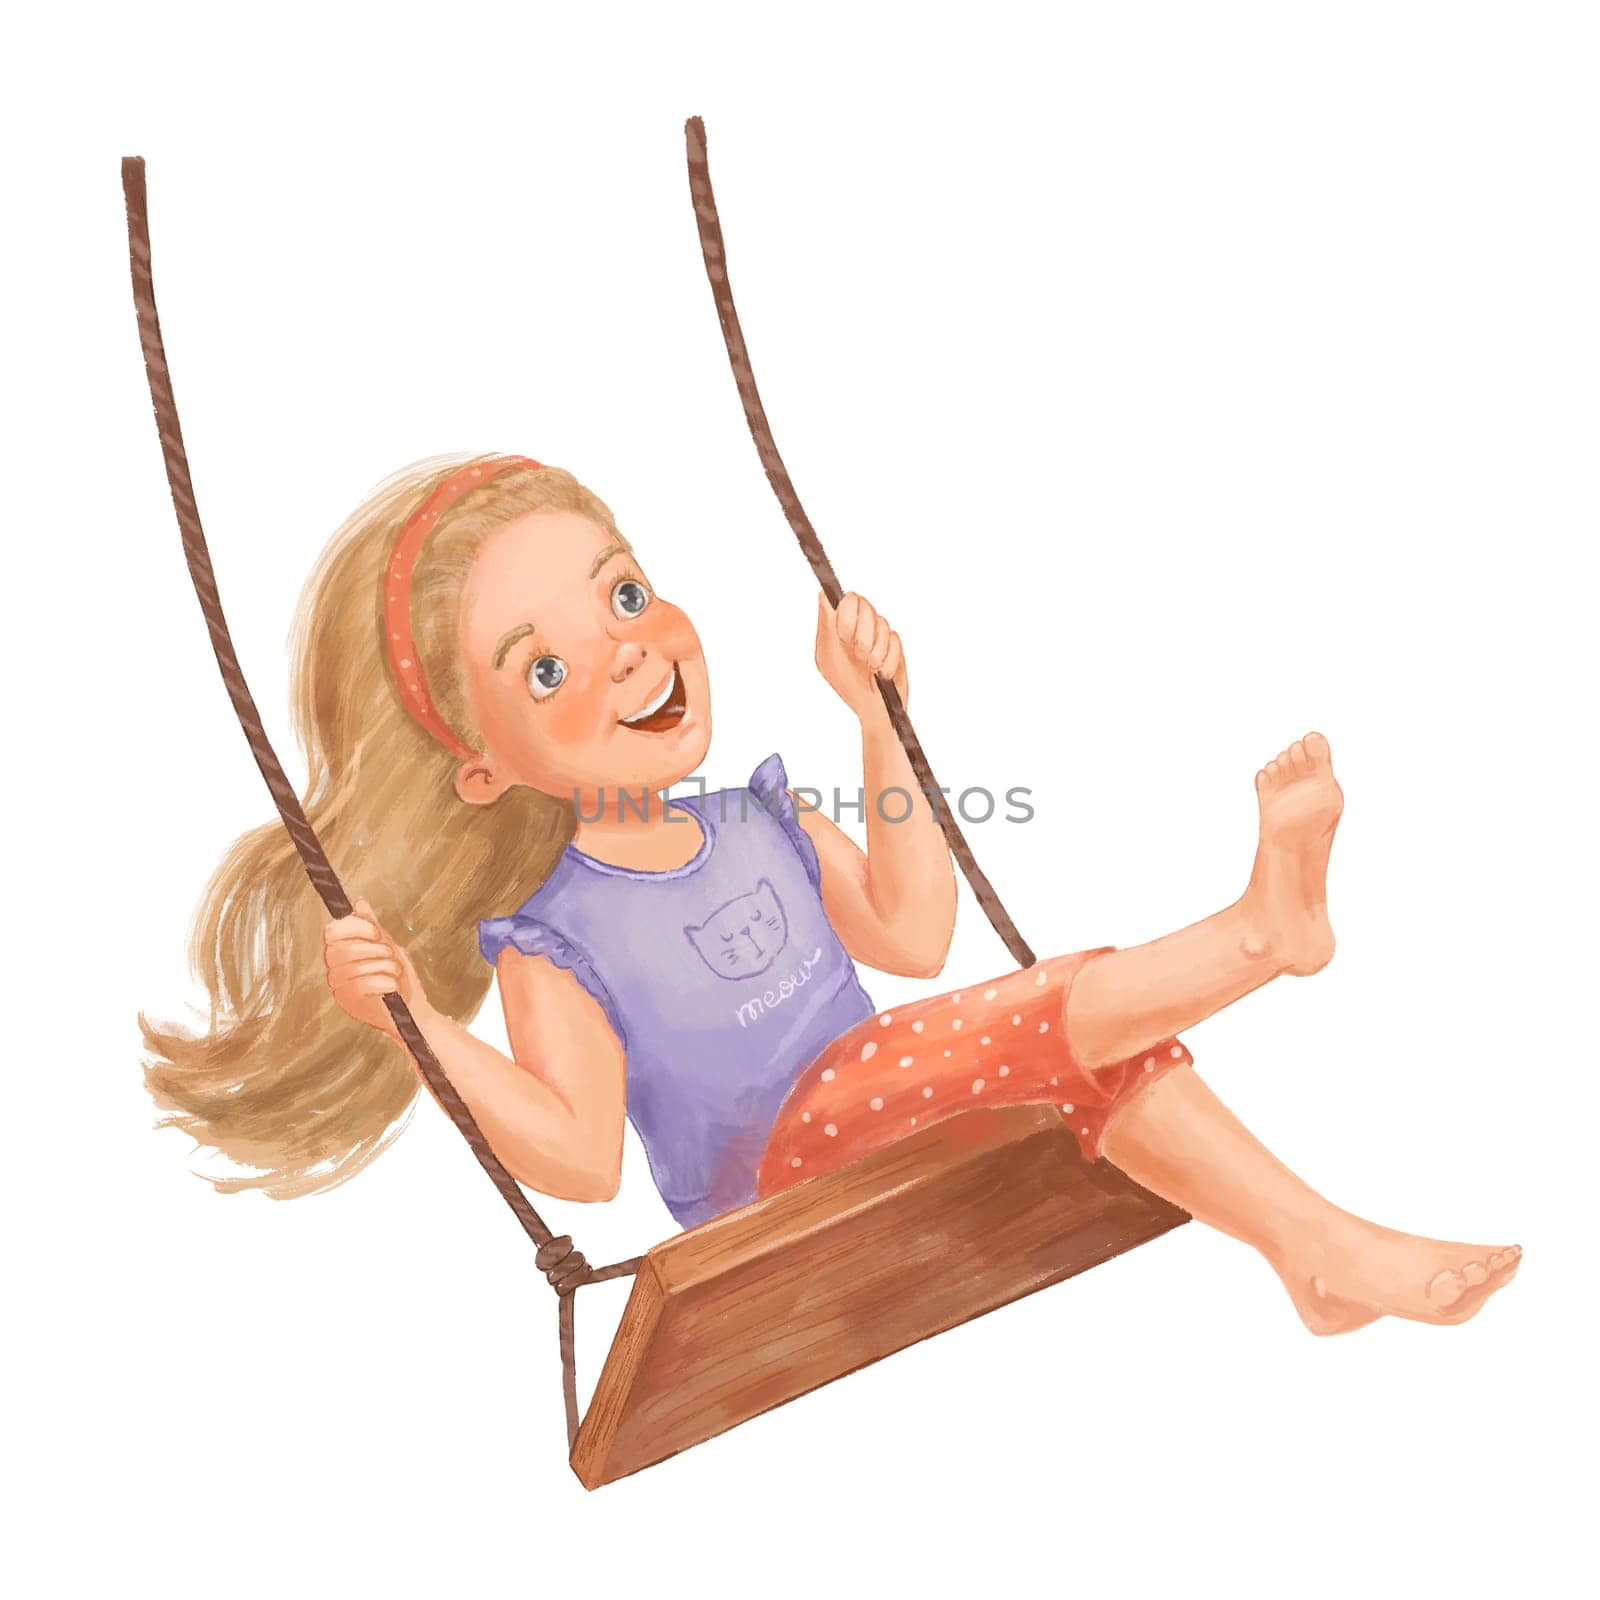 Cute long haired girl sitting on rope swing. Childish illustration isolated on white background